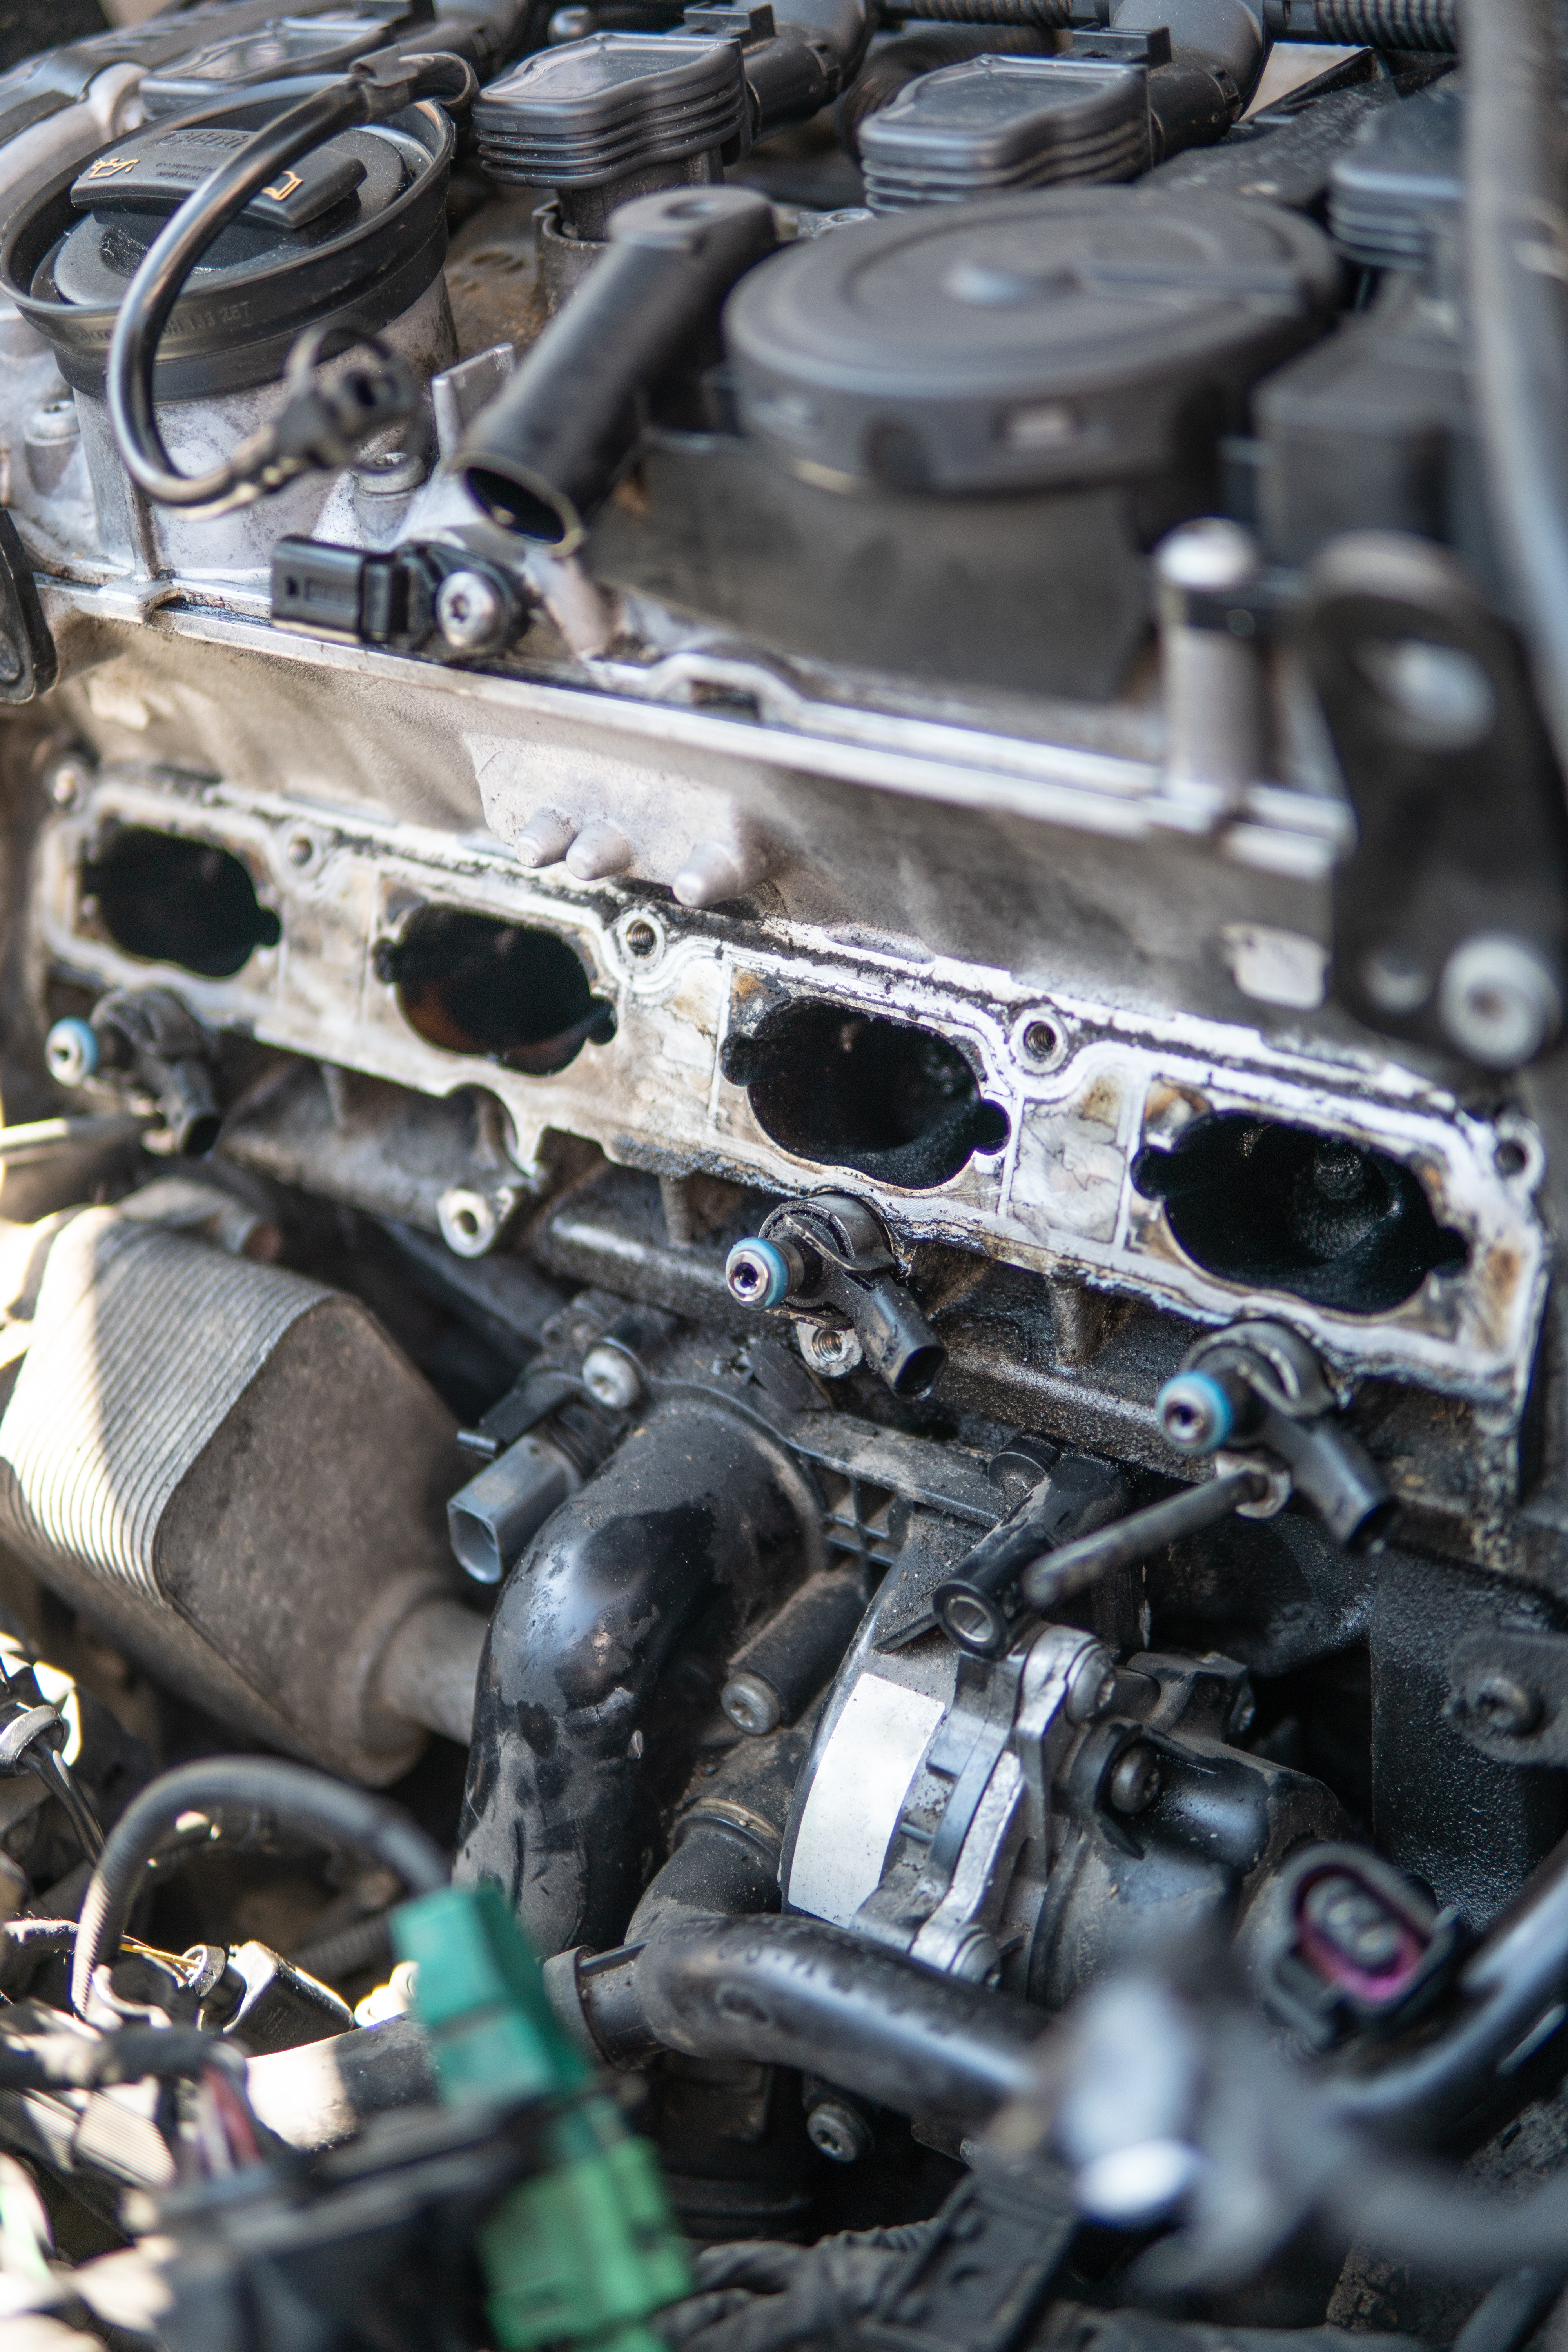 An image of a dirty intake manifold but DPF Alternatives can help with our expert intake manifold cleaning service in Phoenix, AZ.